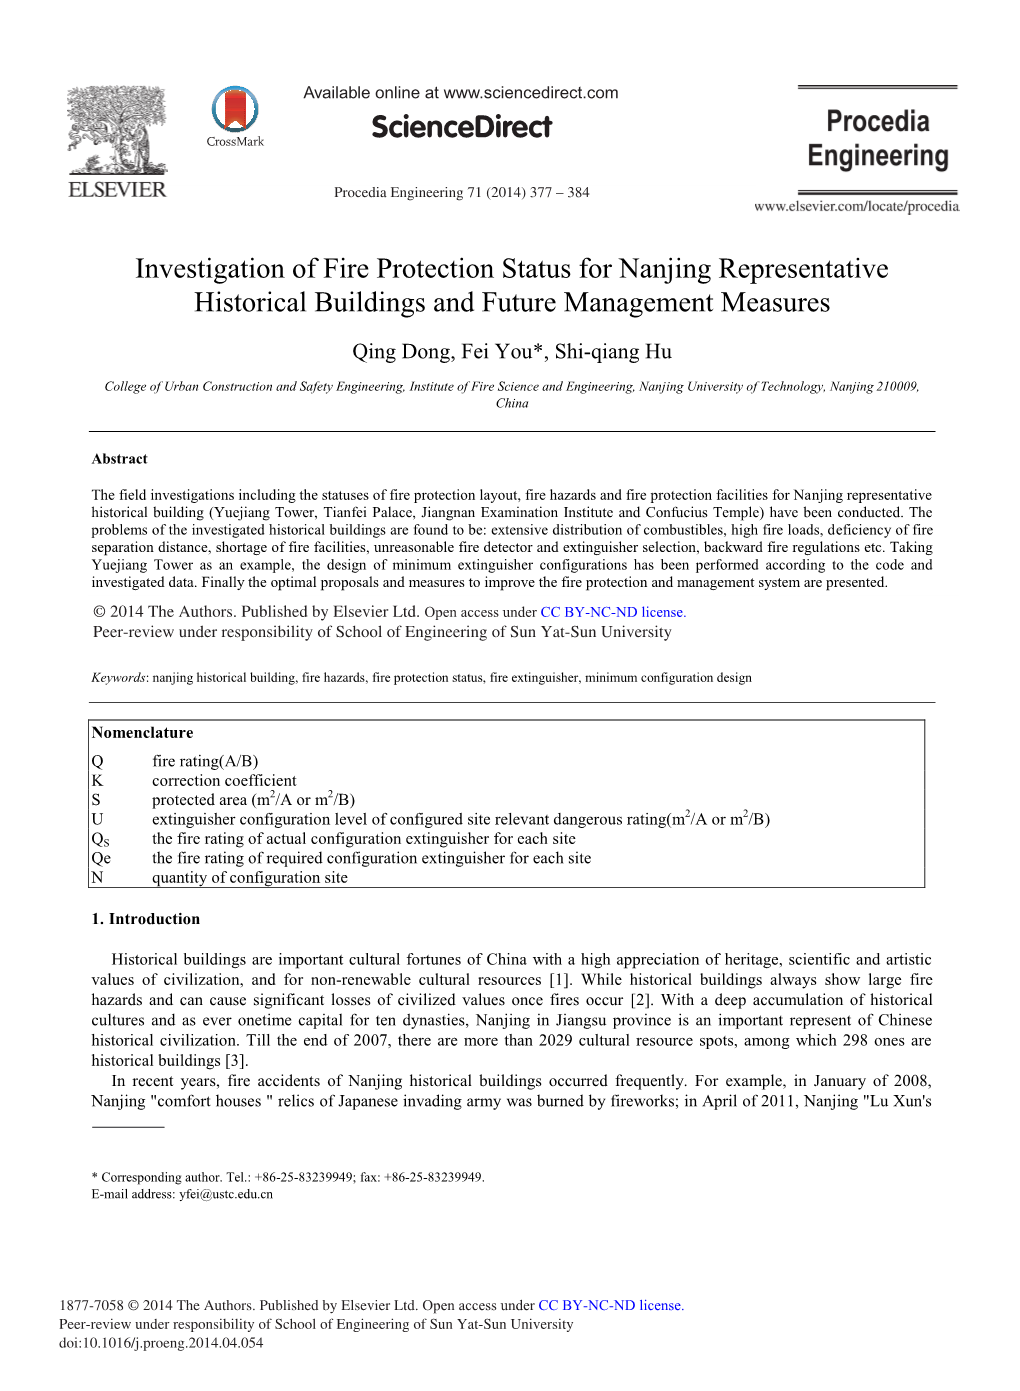 Investigation of Fire Protection Status for Nanjing Representative Historical Buildings and Future Management Measures